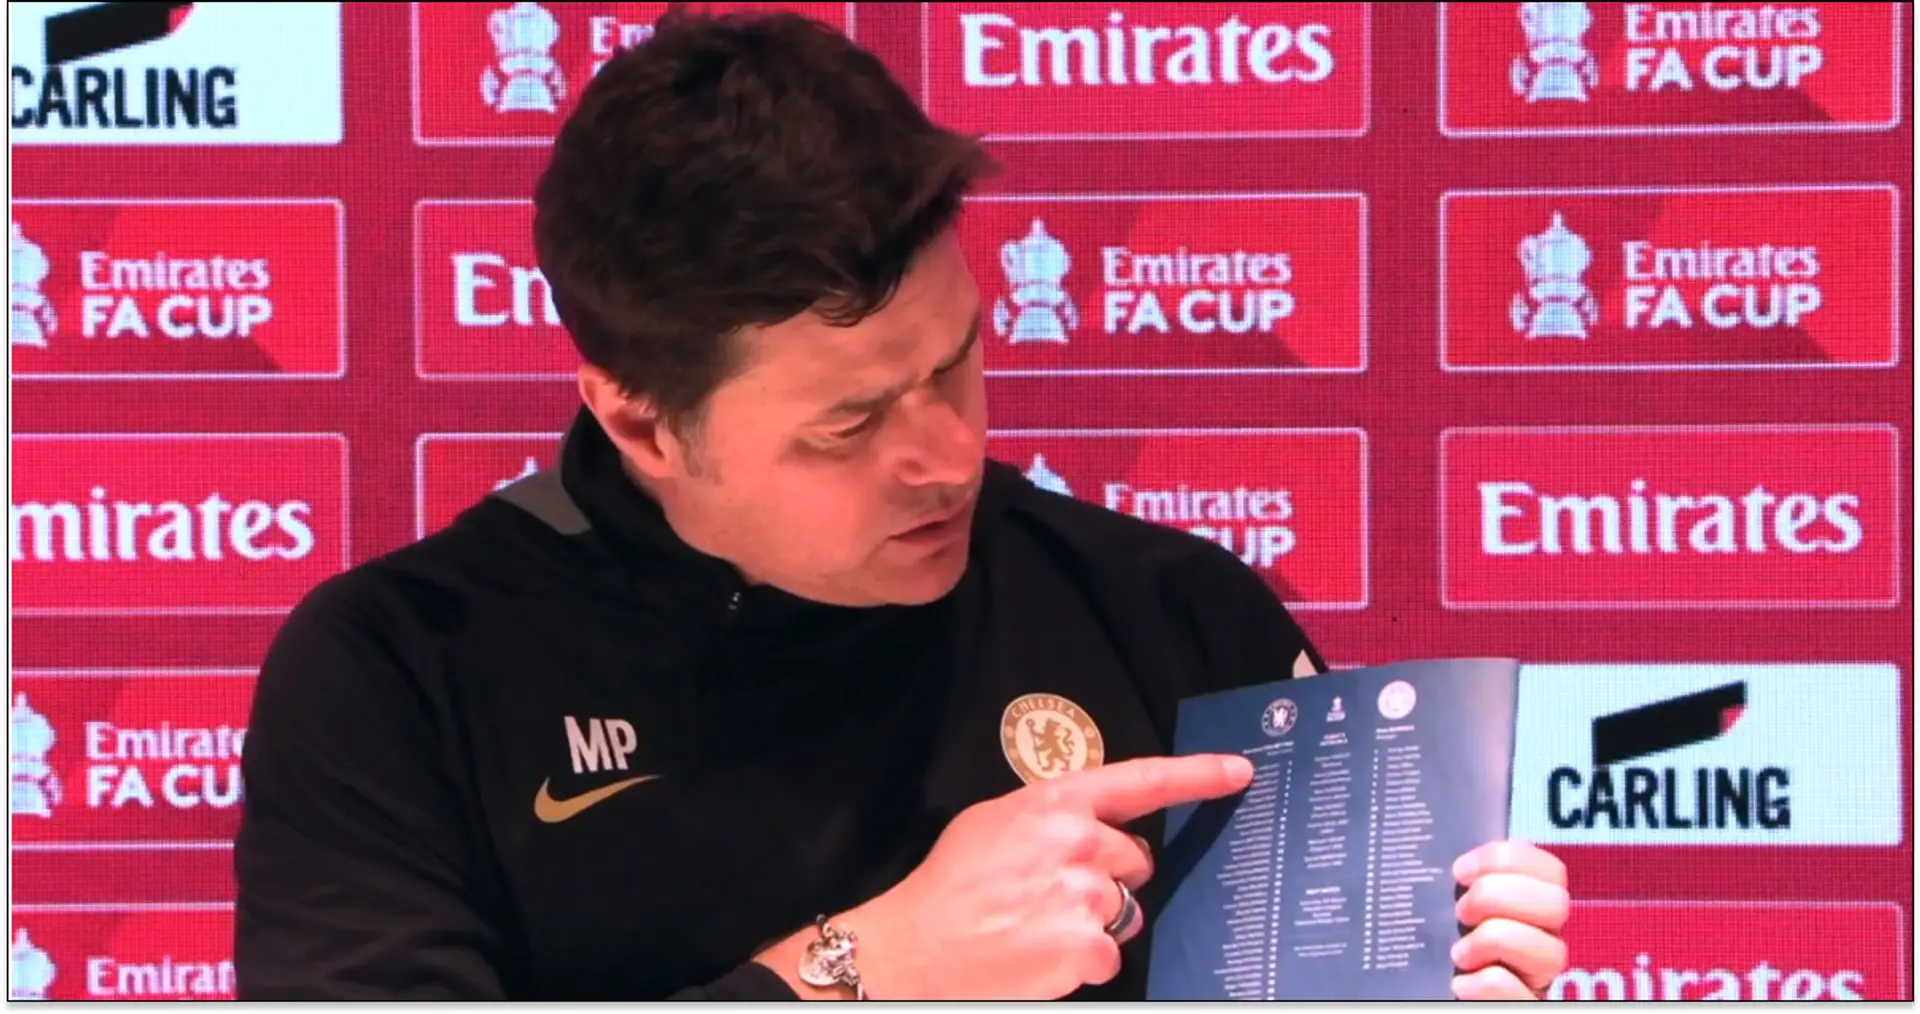 'Look here': Poch uses prop in press conference to defend himself from angry Chelsea fans